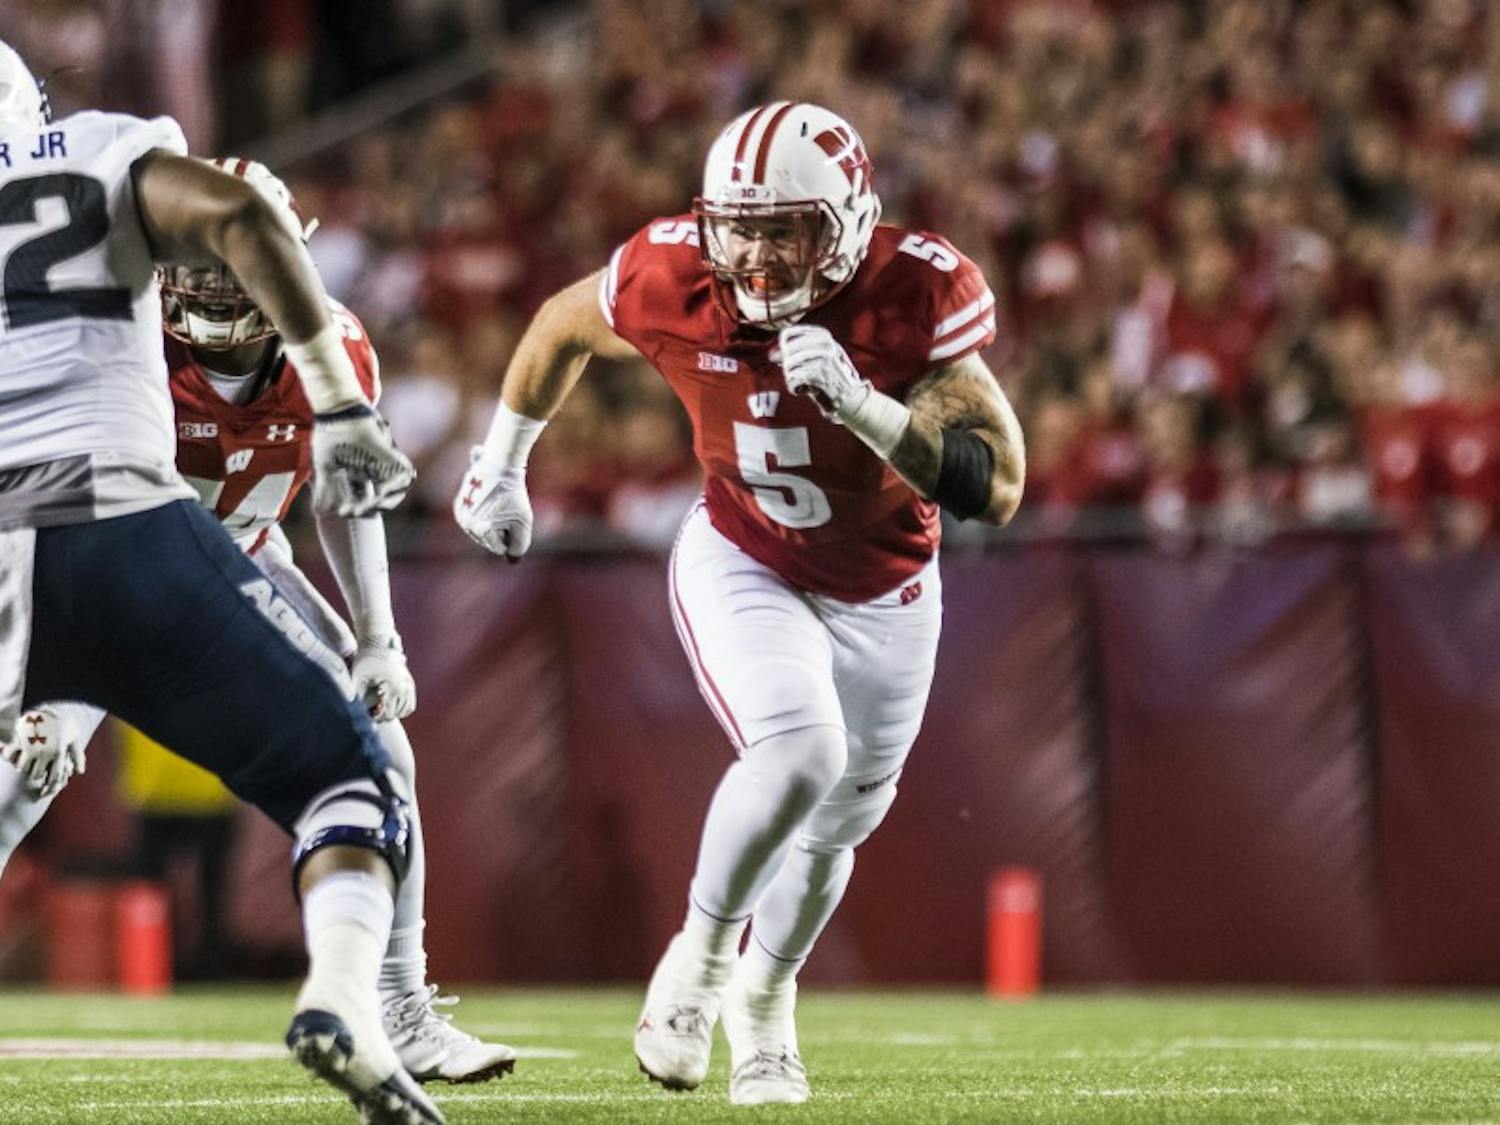 Garret Dooley and the Badgers' defense hopes&nbsp;to knock off Iowa and continue their undefeated season on Saturday.